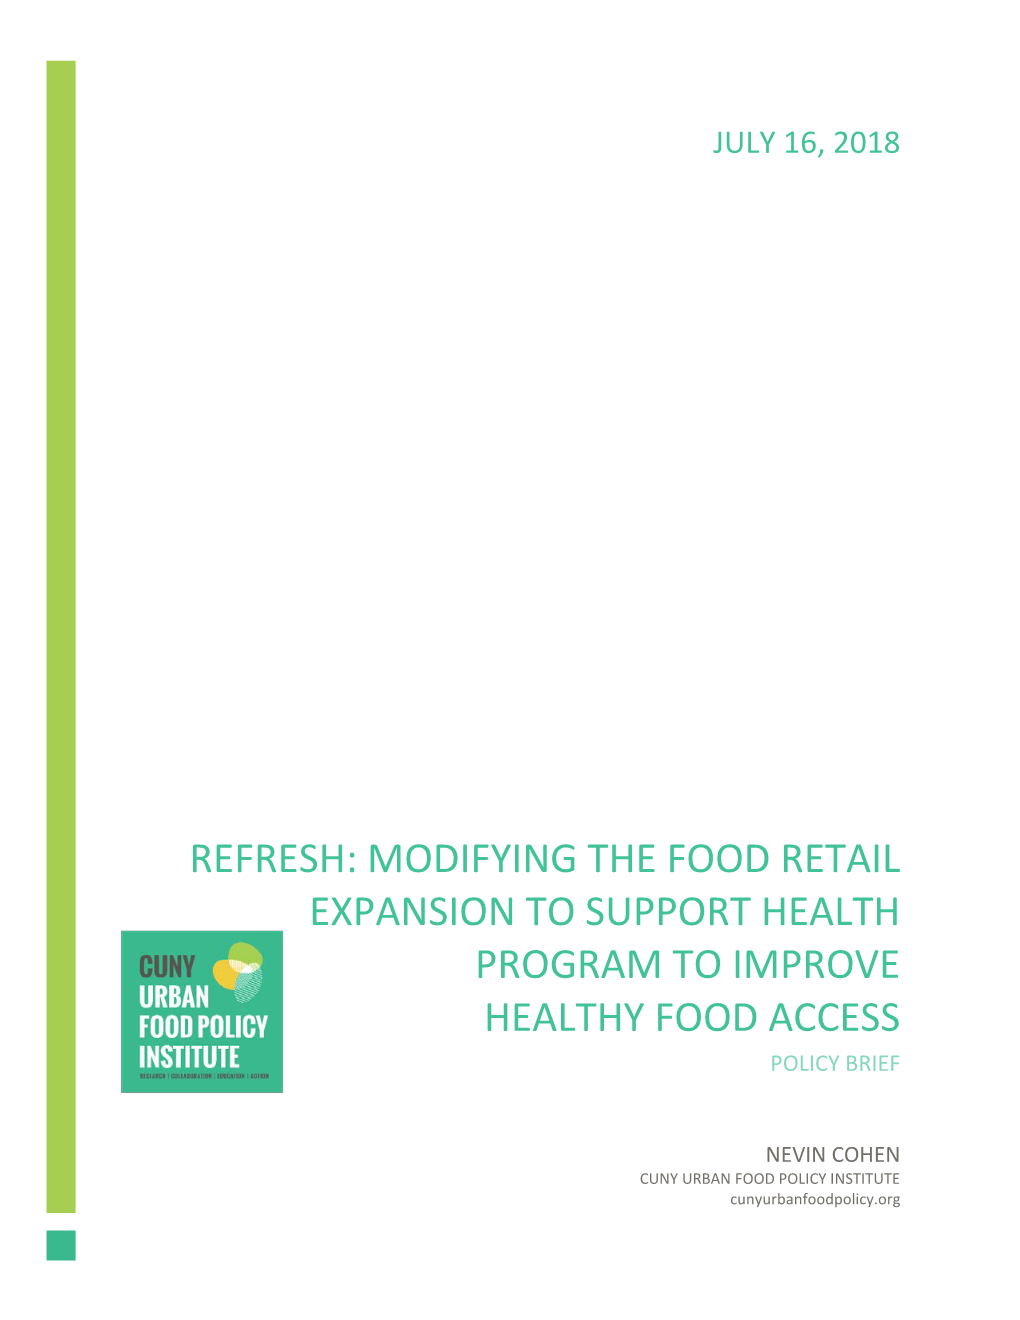 Refresh: Modifying the Food Retail Expansion to Support Health Program to Improve Healthy Food Access Policy Brief